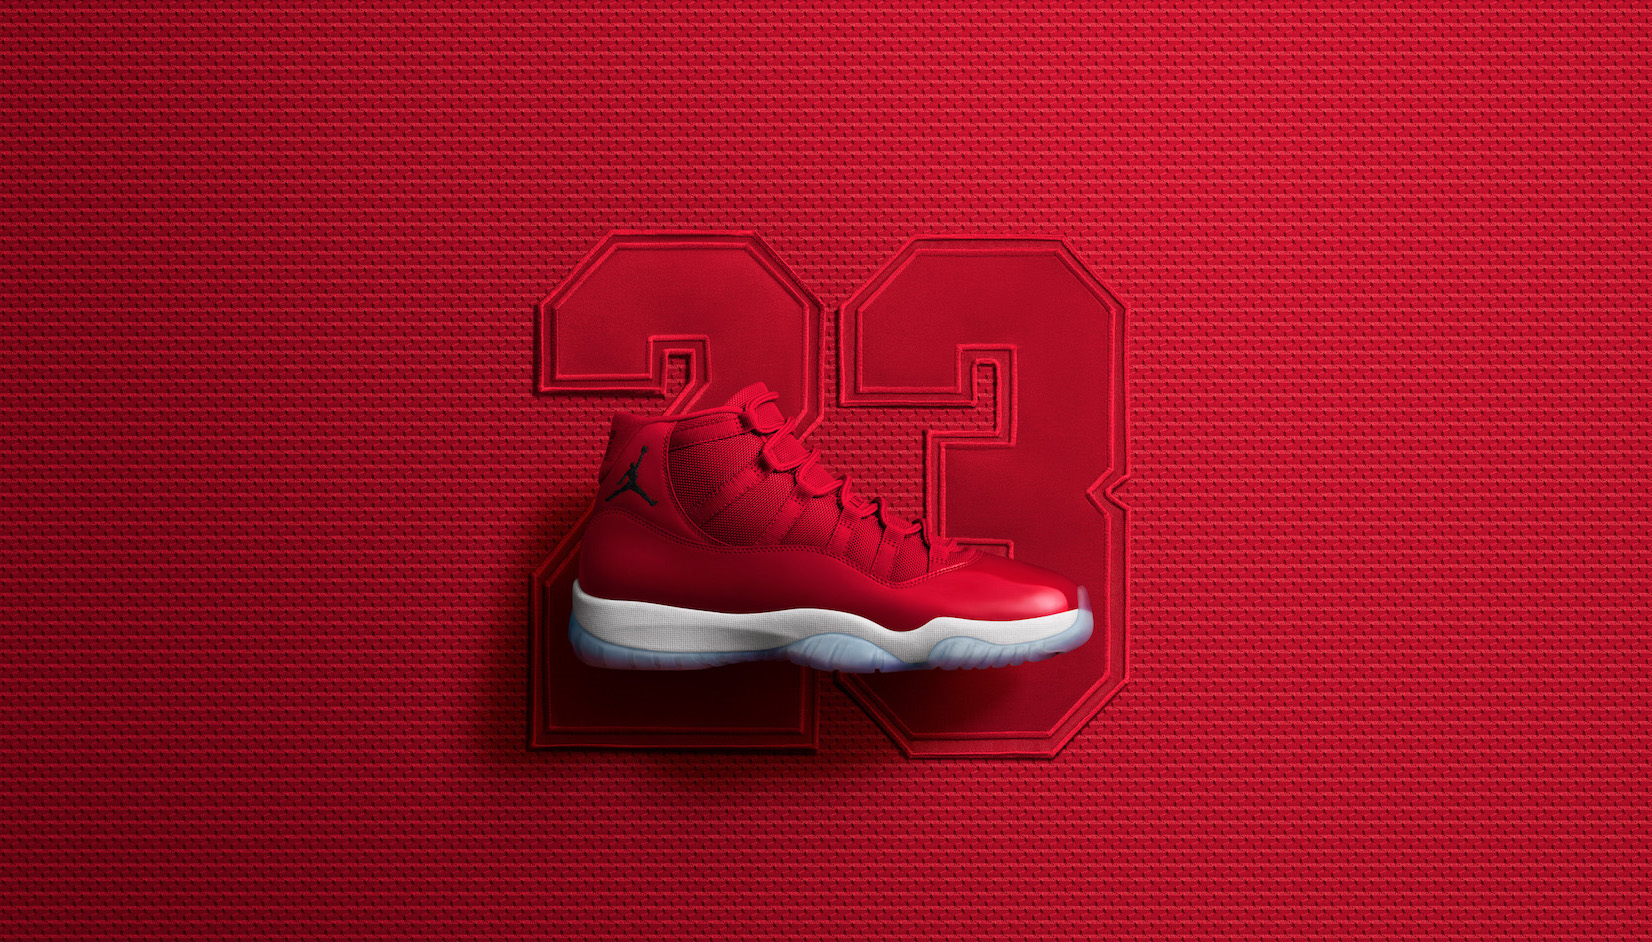 The Air Jordan 11 'Win Like '96' is a Tribute to Chicago